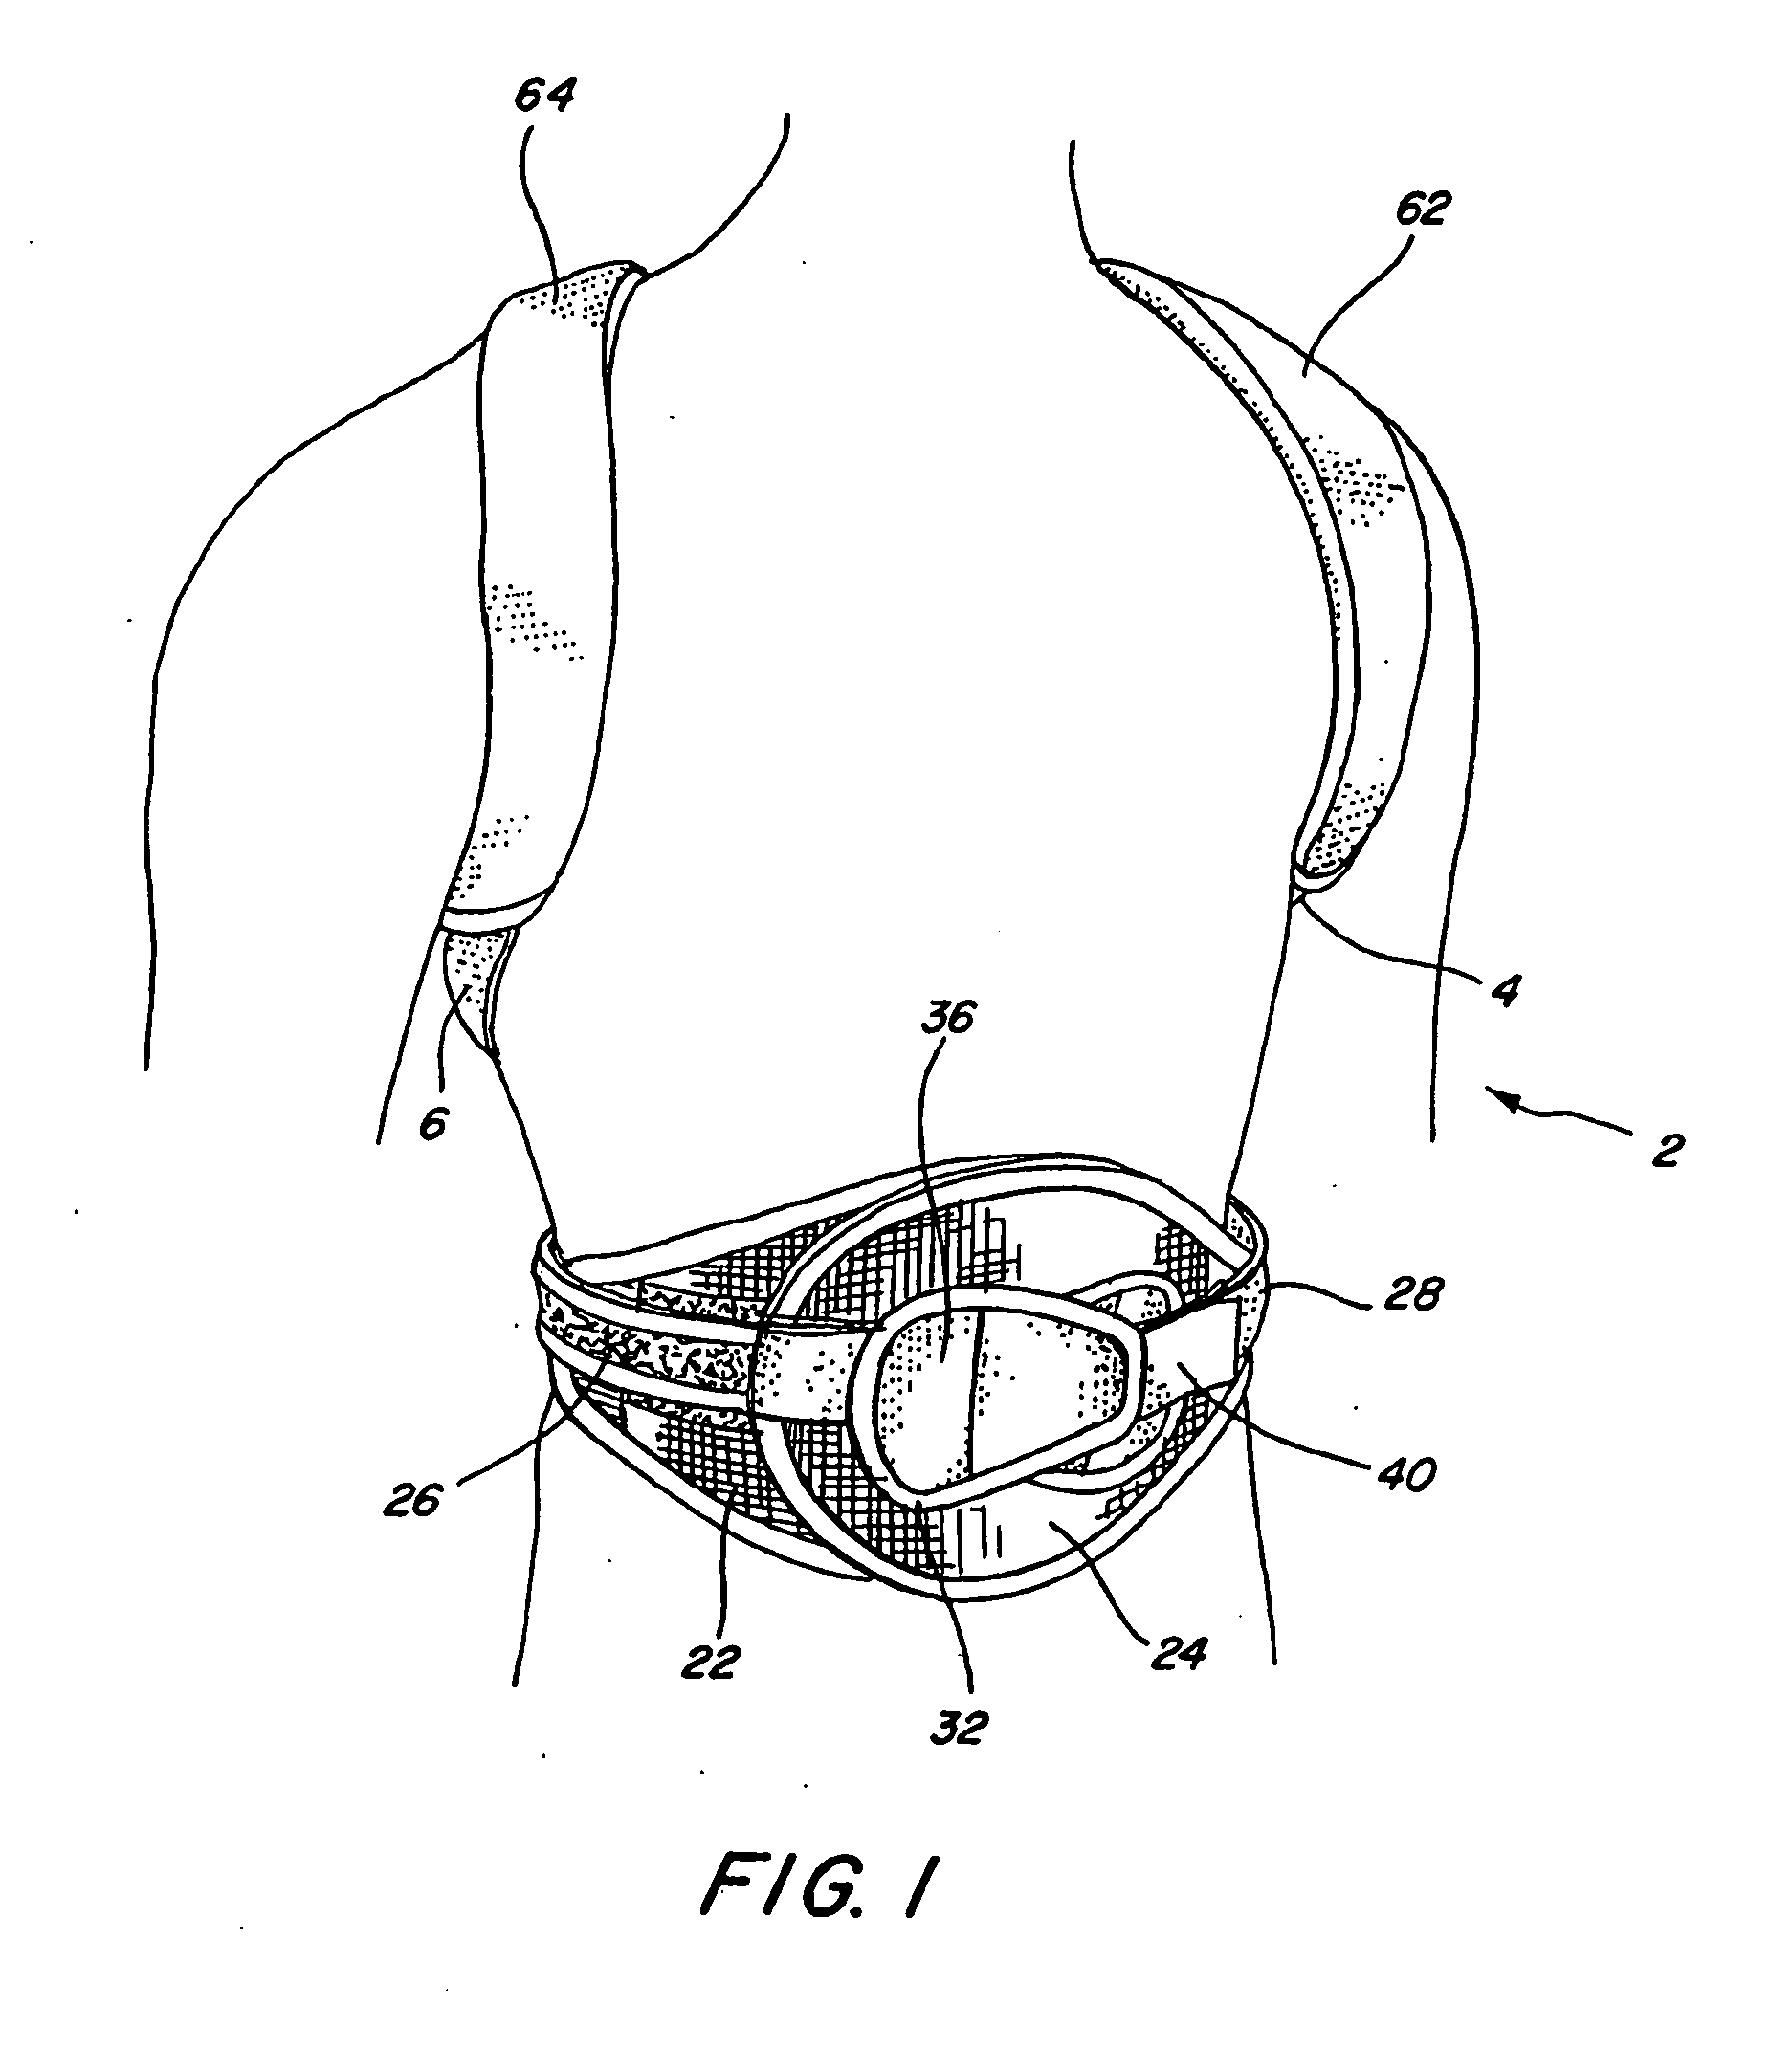 Adjustable posterior spinal orthosis